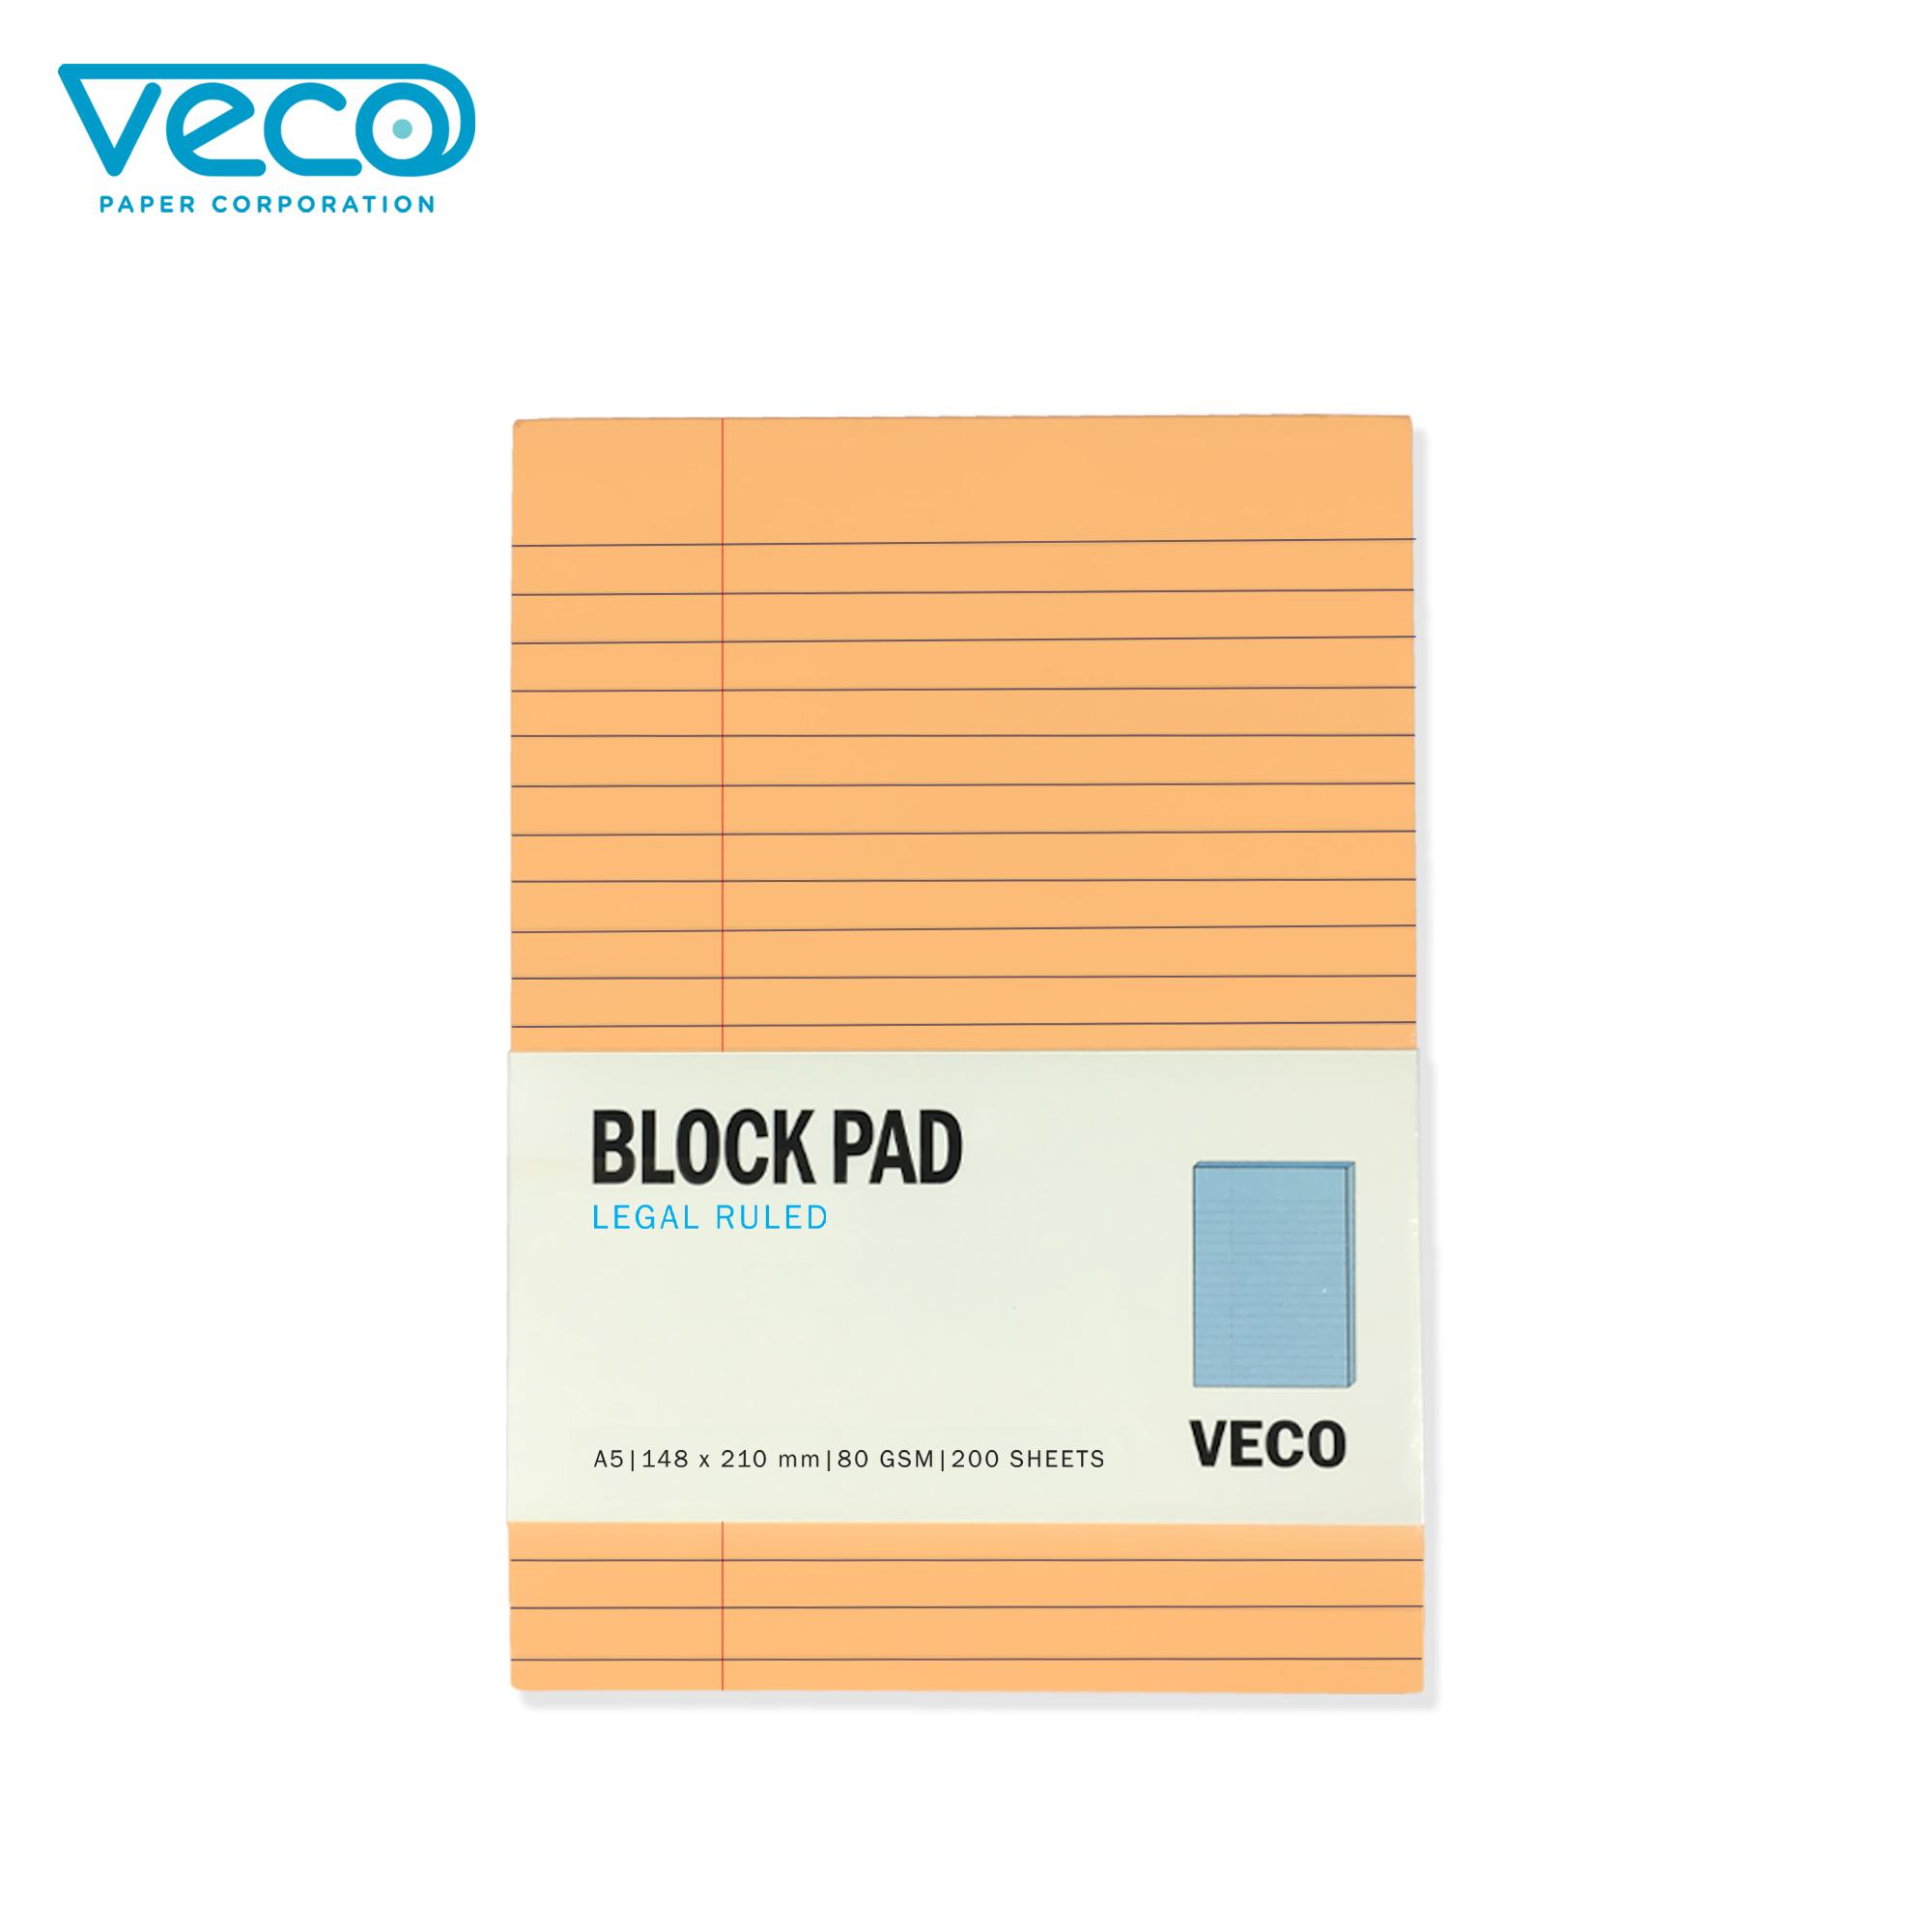 Yellow Pad Paper (Veco) Long 1 Whole 90s - Supplies 24/7 Delivery